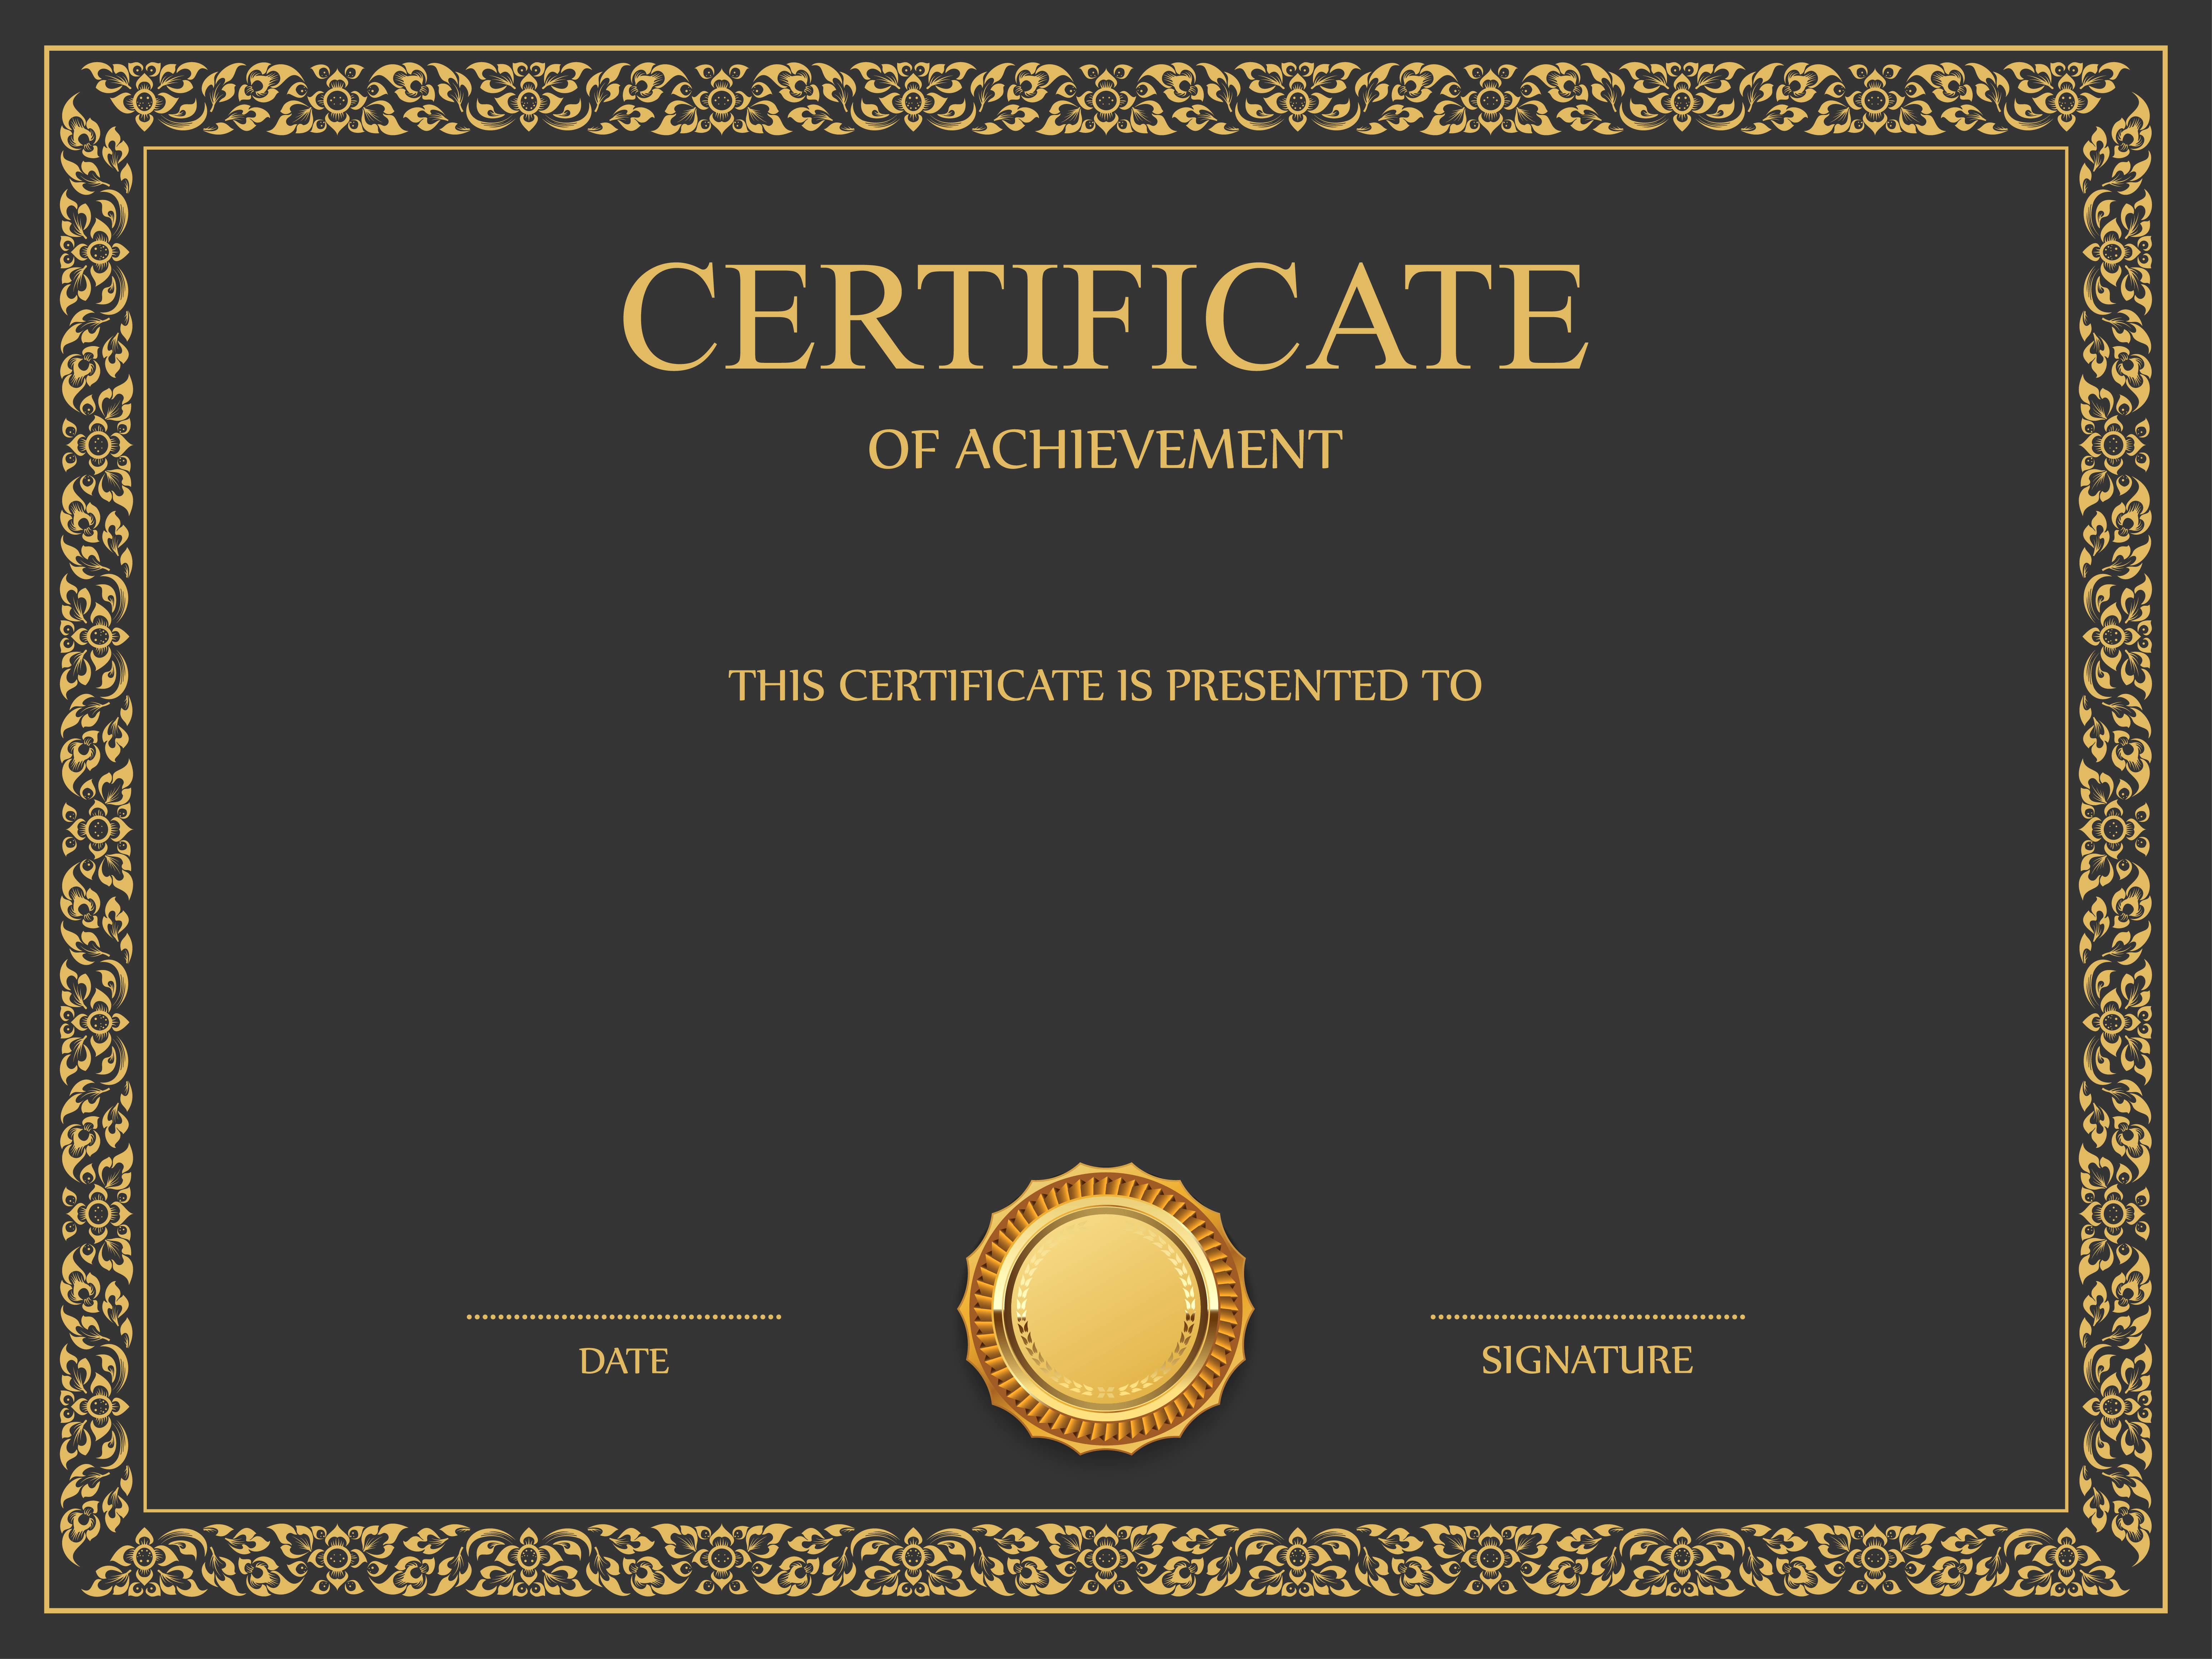 Certificate Template PNG Image PurePNG Free Transparent CC0 PNG Image Library